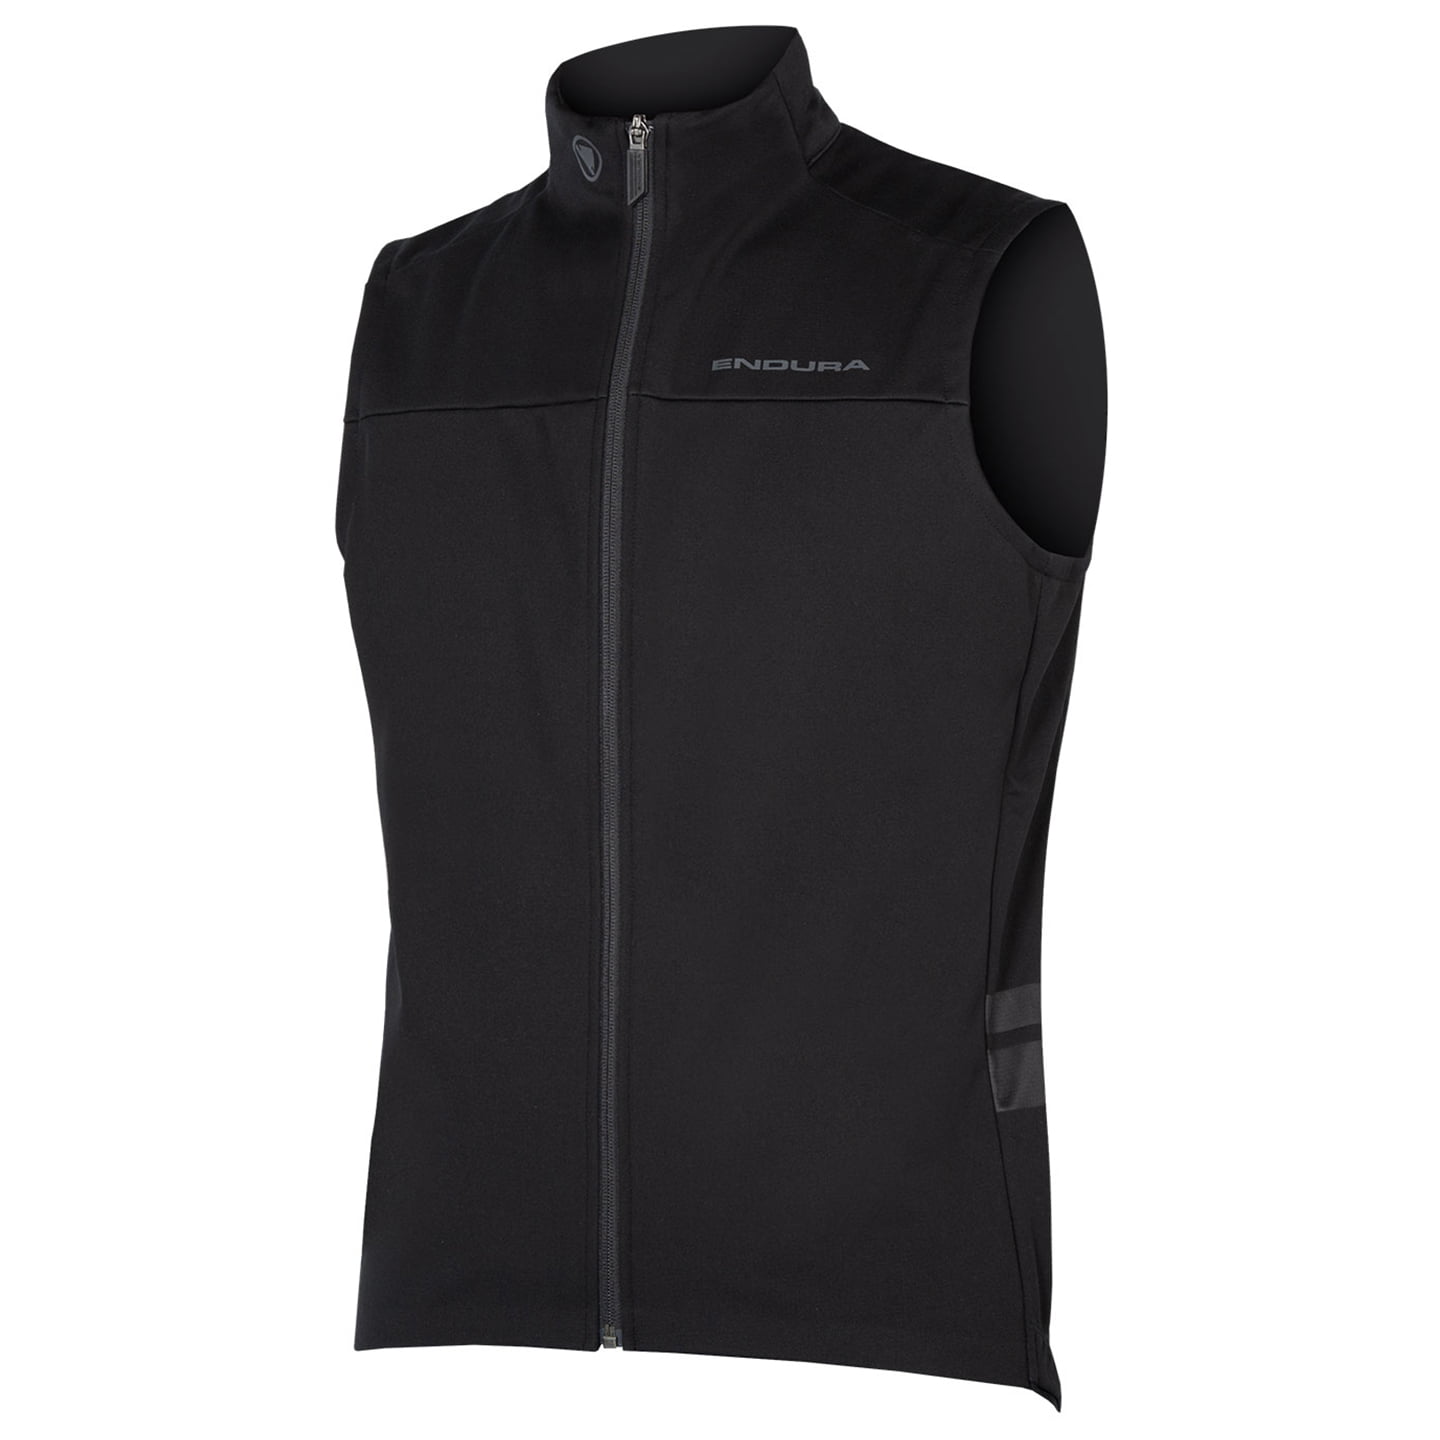 ENDURA Windchill II Thermal Vest Thermal Vest, for men, size XL, Cycling vest, Cycling clothing